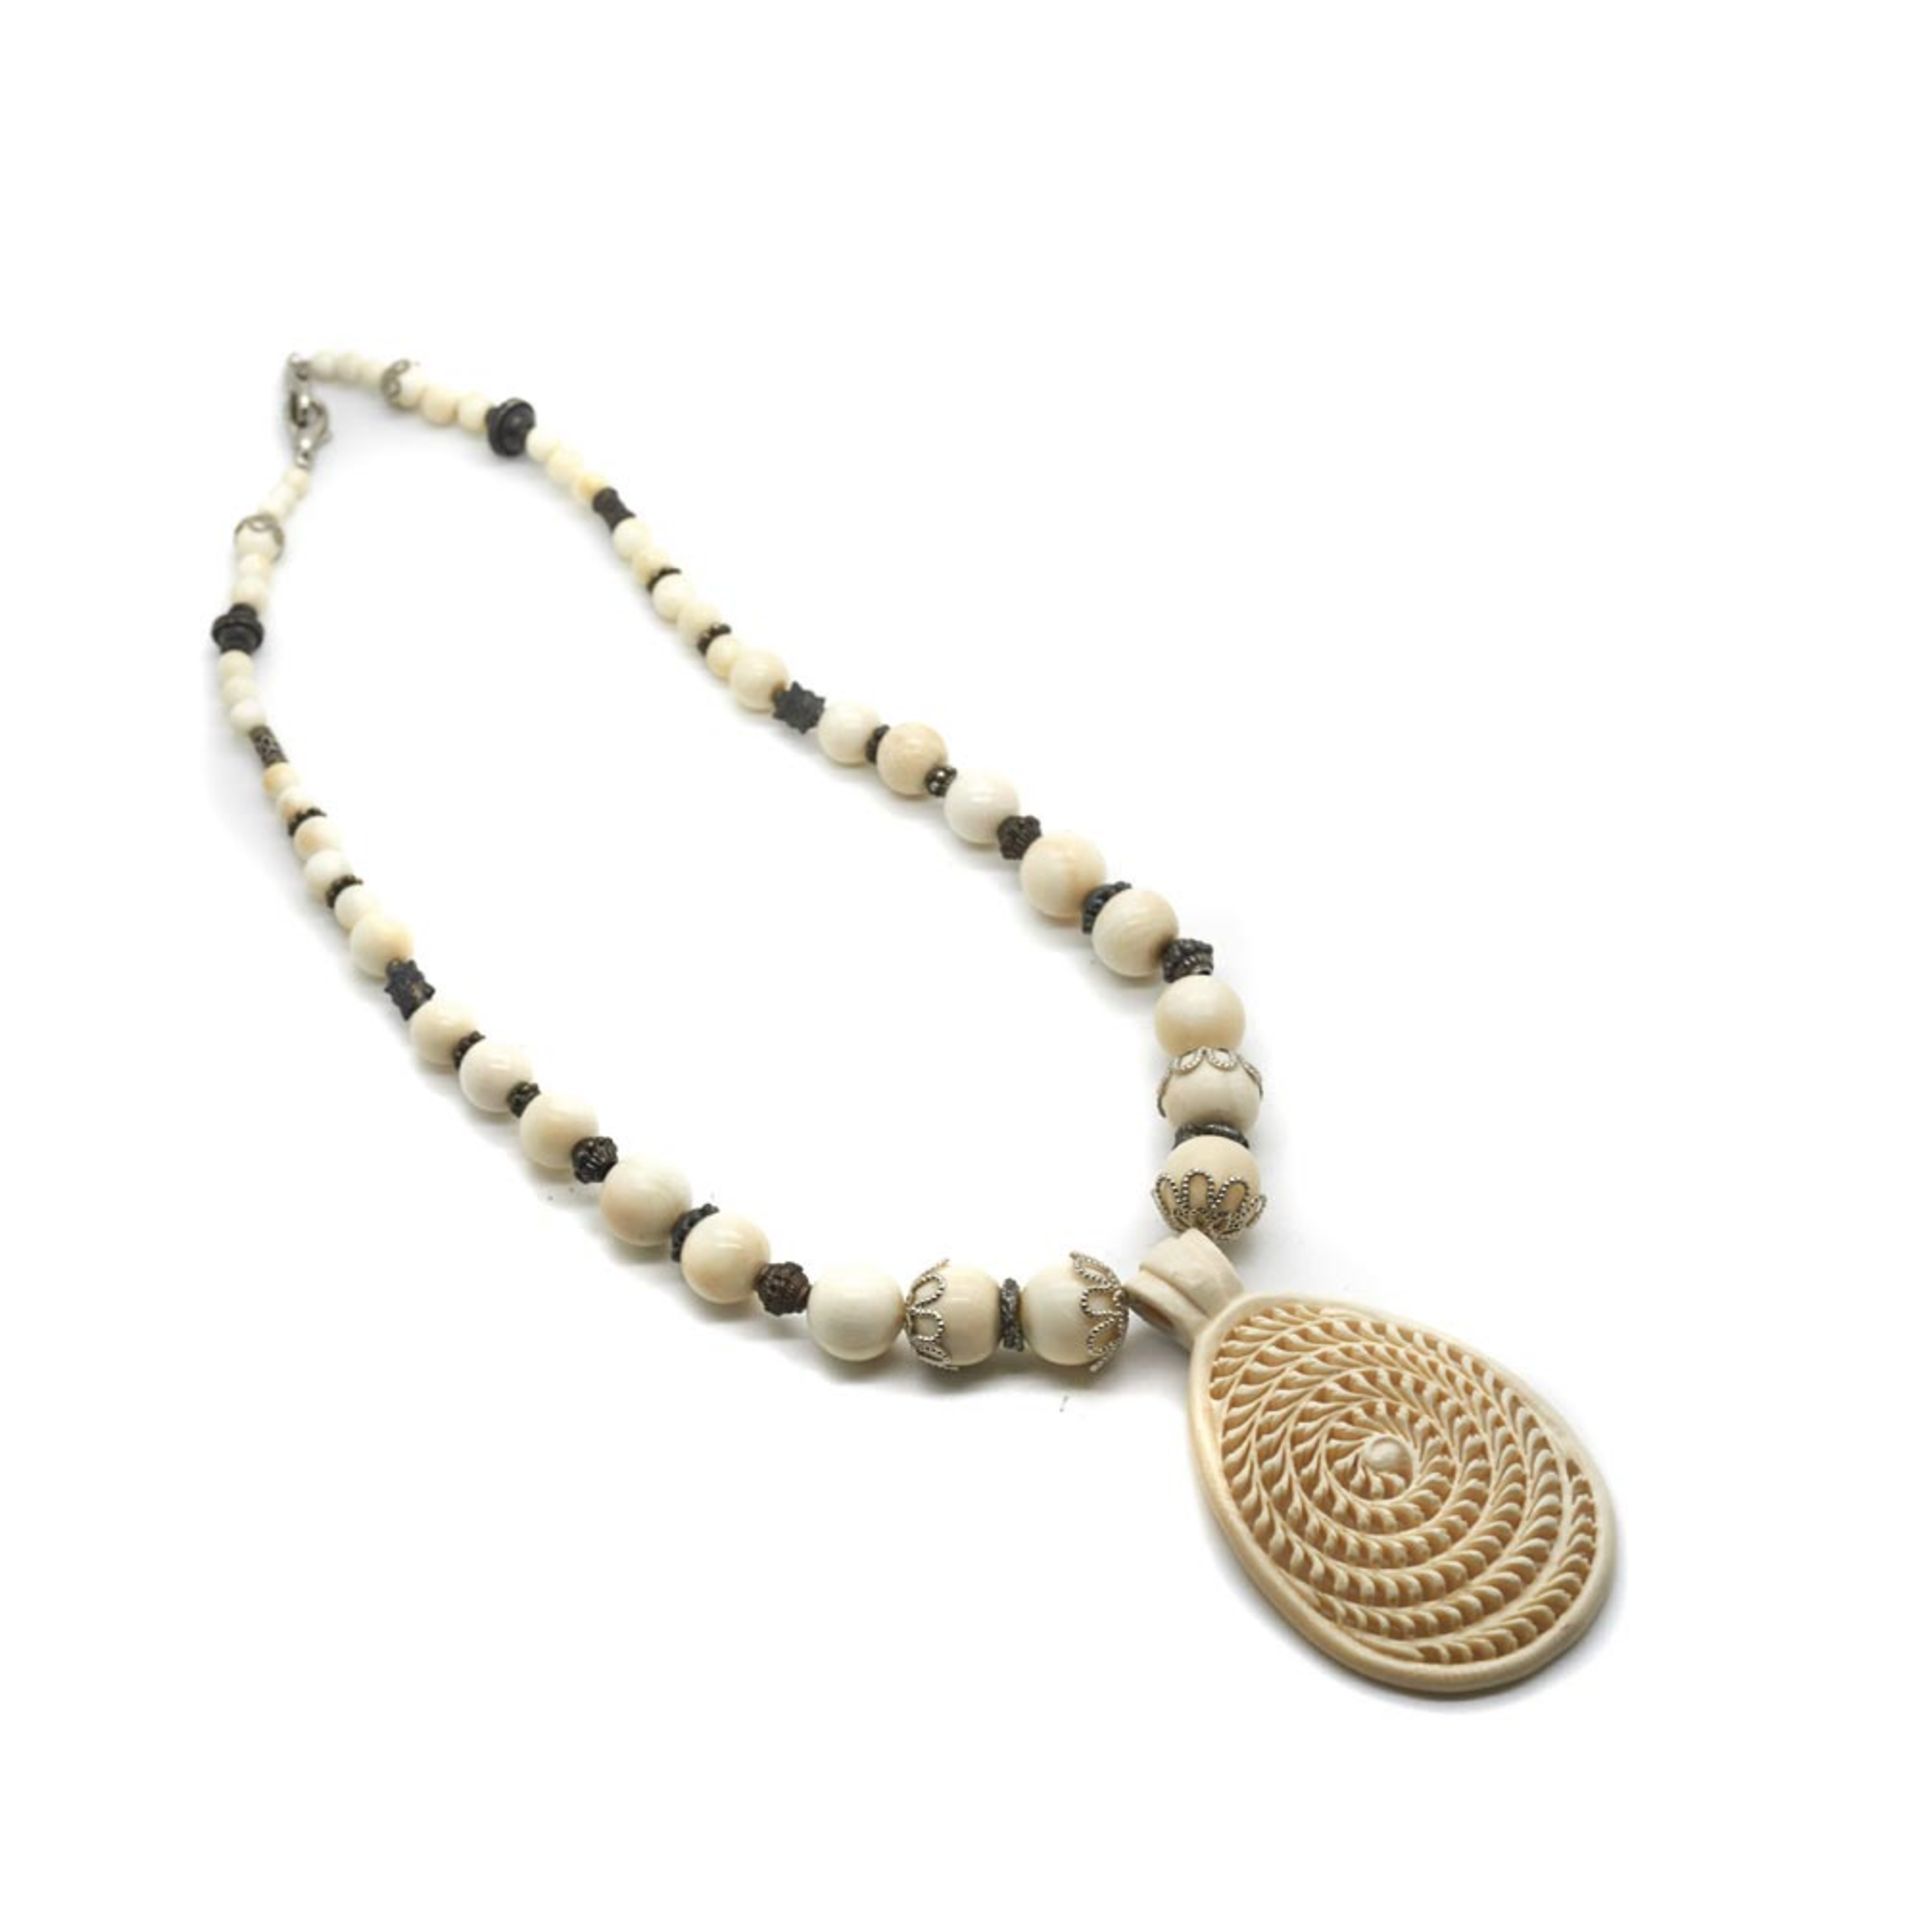 Mammoth ivory necklace